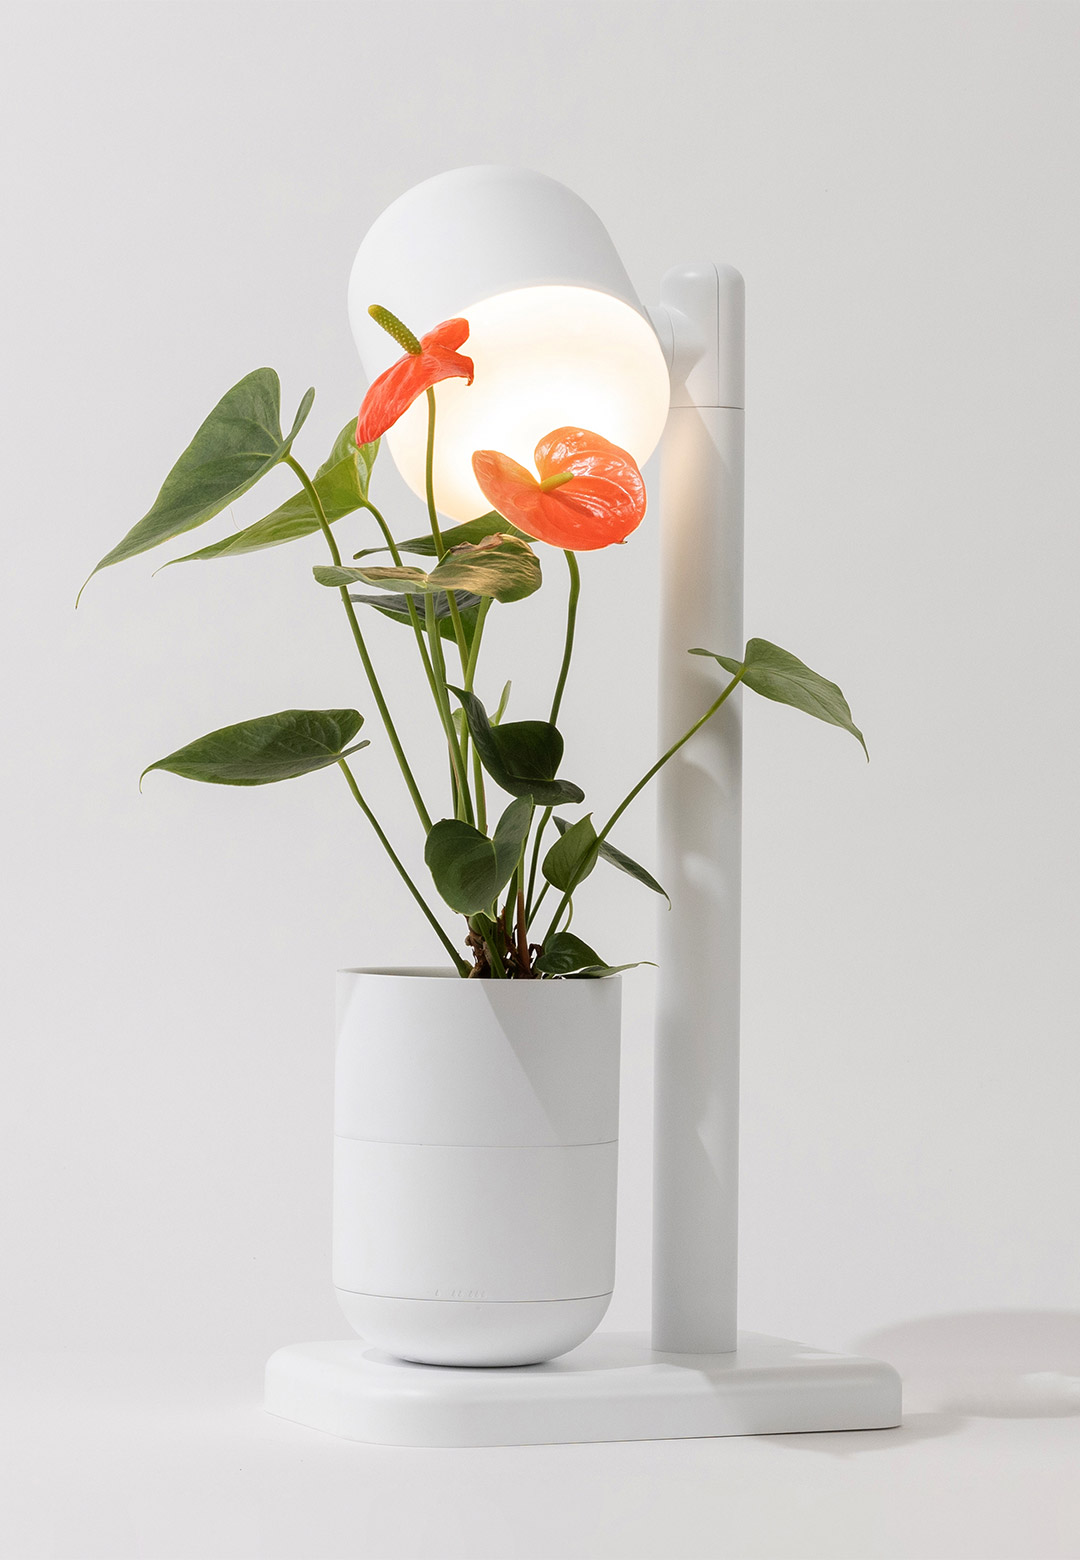 Moss brings nature indoors as a revolution in indoor gardening with ‘Grow Lamp’